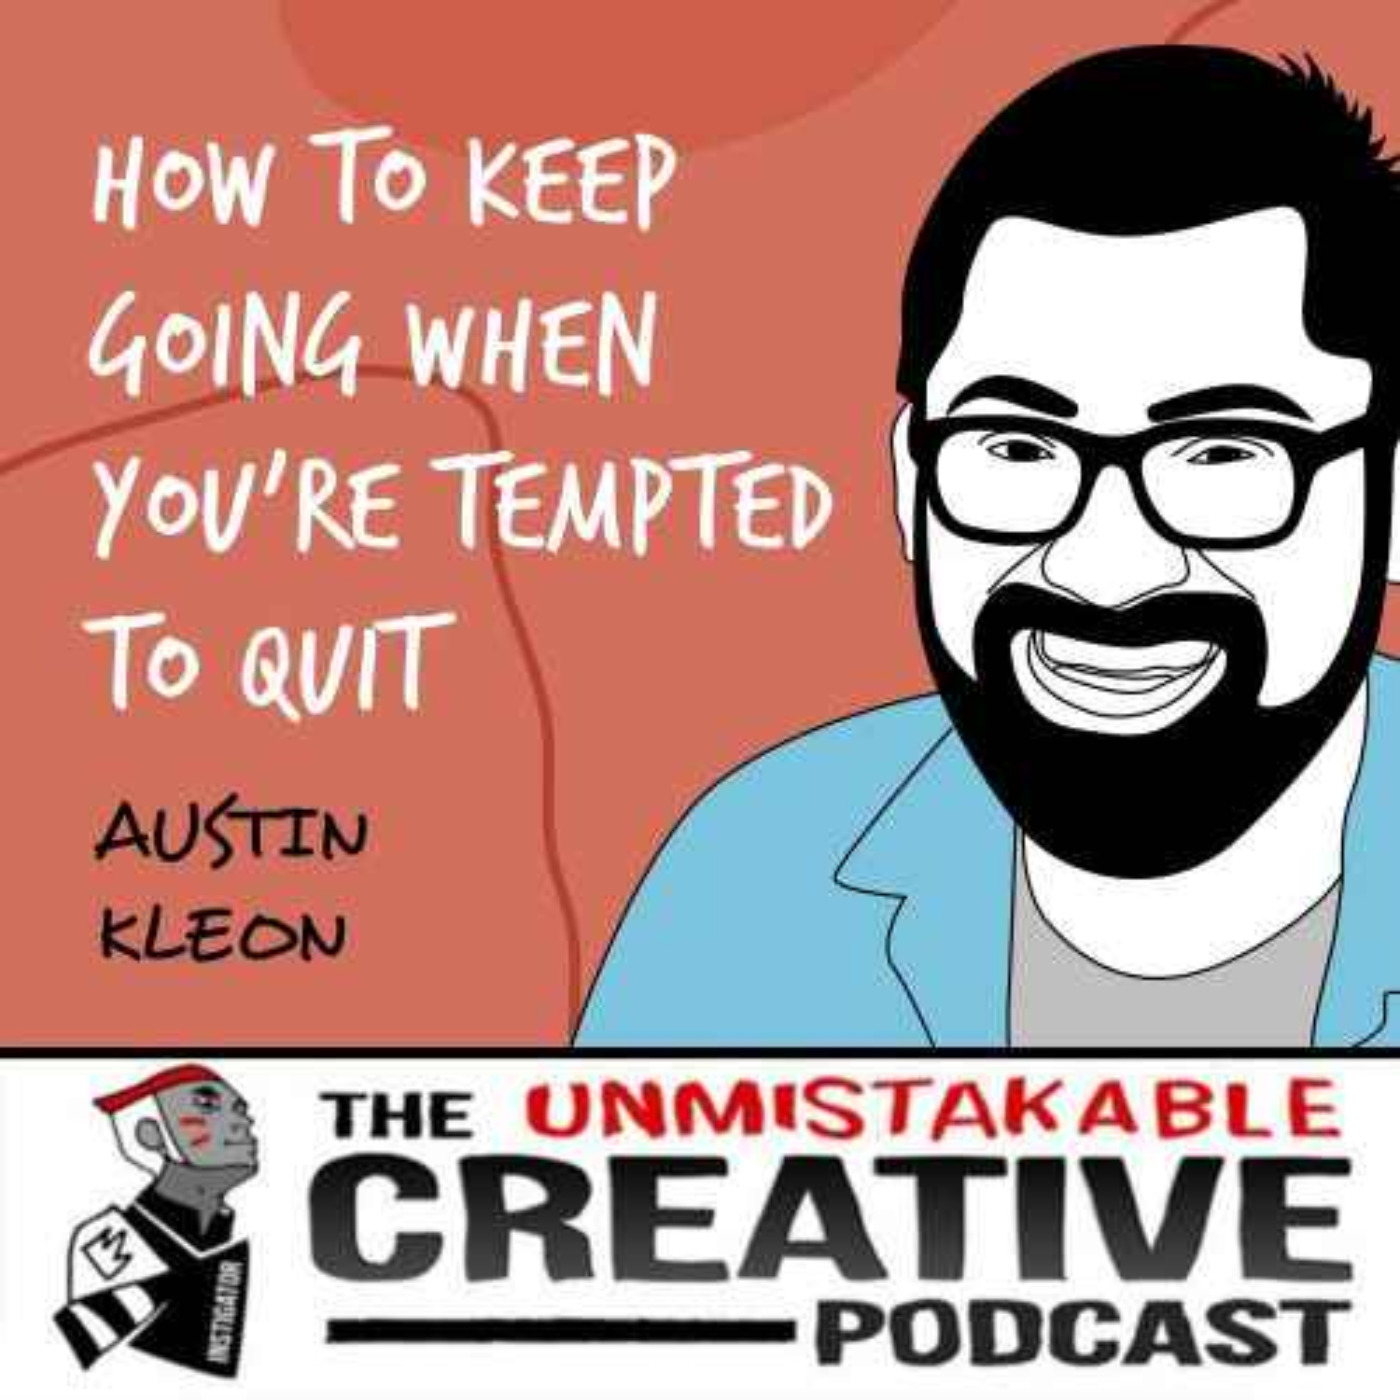 The Wisdom Series: Austin Kleon | How to Keep Going When You're Tempted to Quit